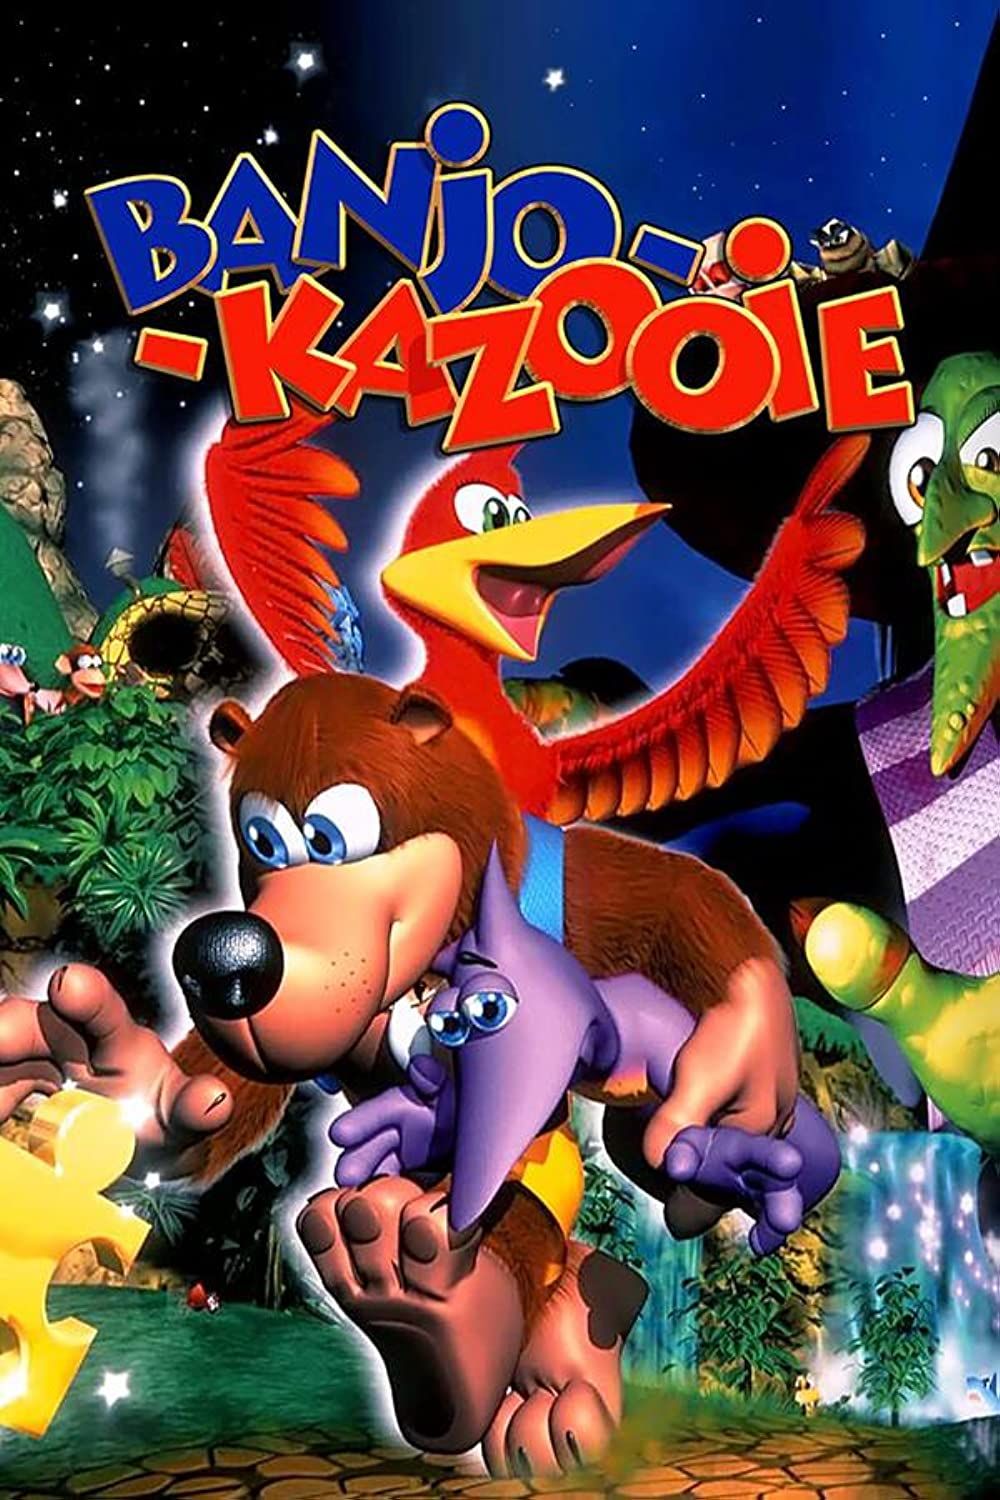 Head of Xbox Phil Spencer Responds to Fan Demand for New BanjoKazooie Game